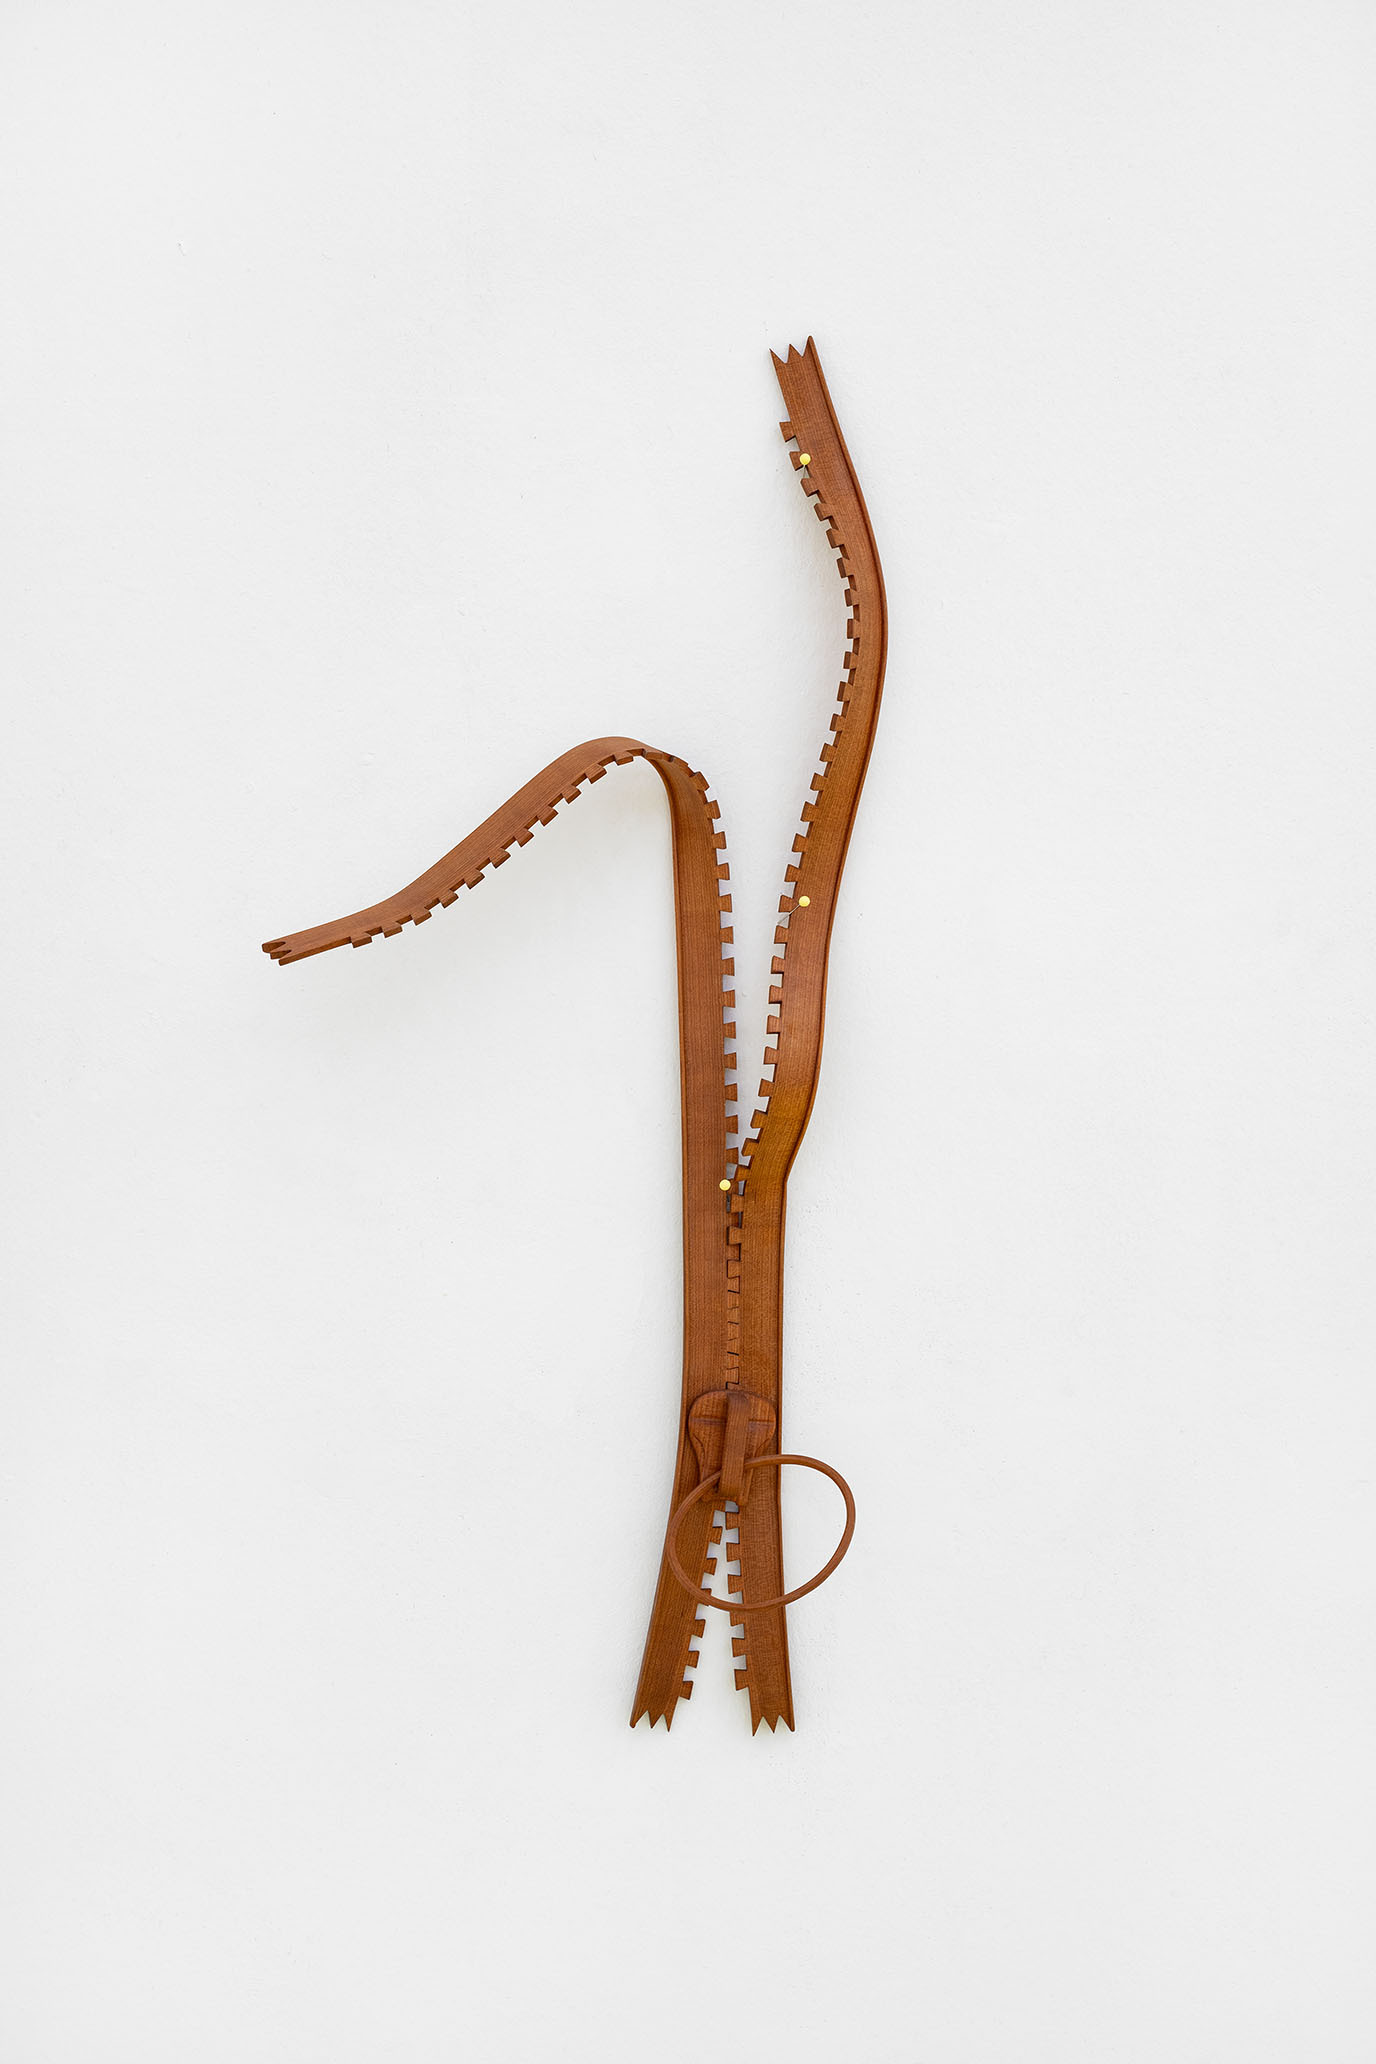 Tobas IZSÓ from the series "off the cuff" #4, 2024 Cherry wood  99 x 42 x 15 cm Courtesy the artist and KOENIG2 by_robbygreif, Vienna 